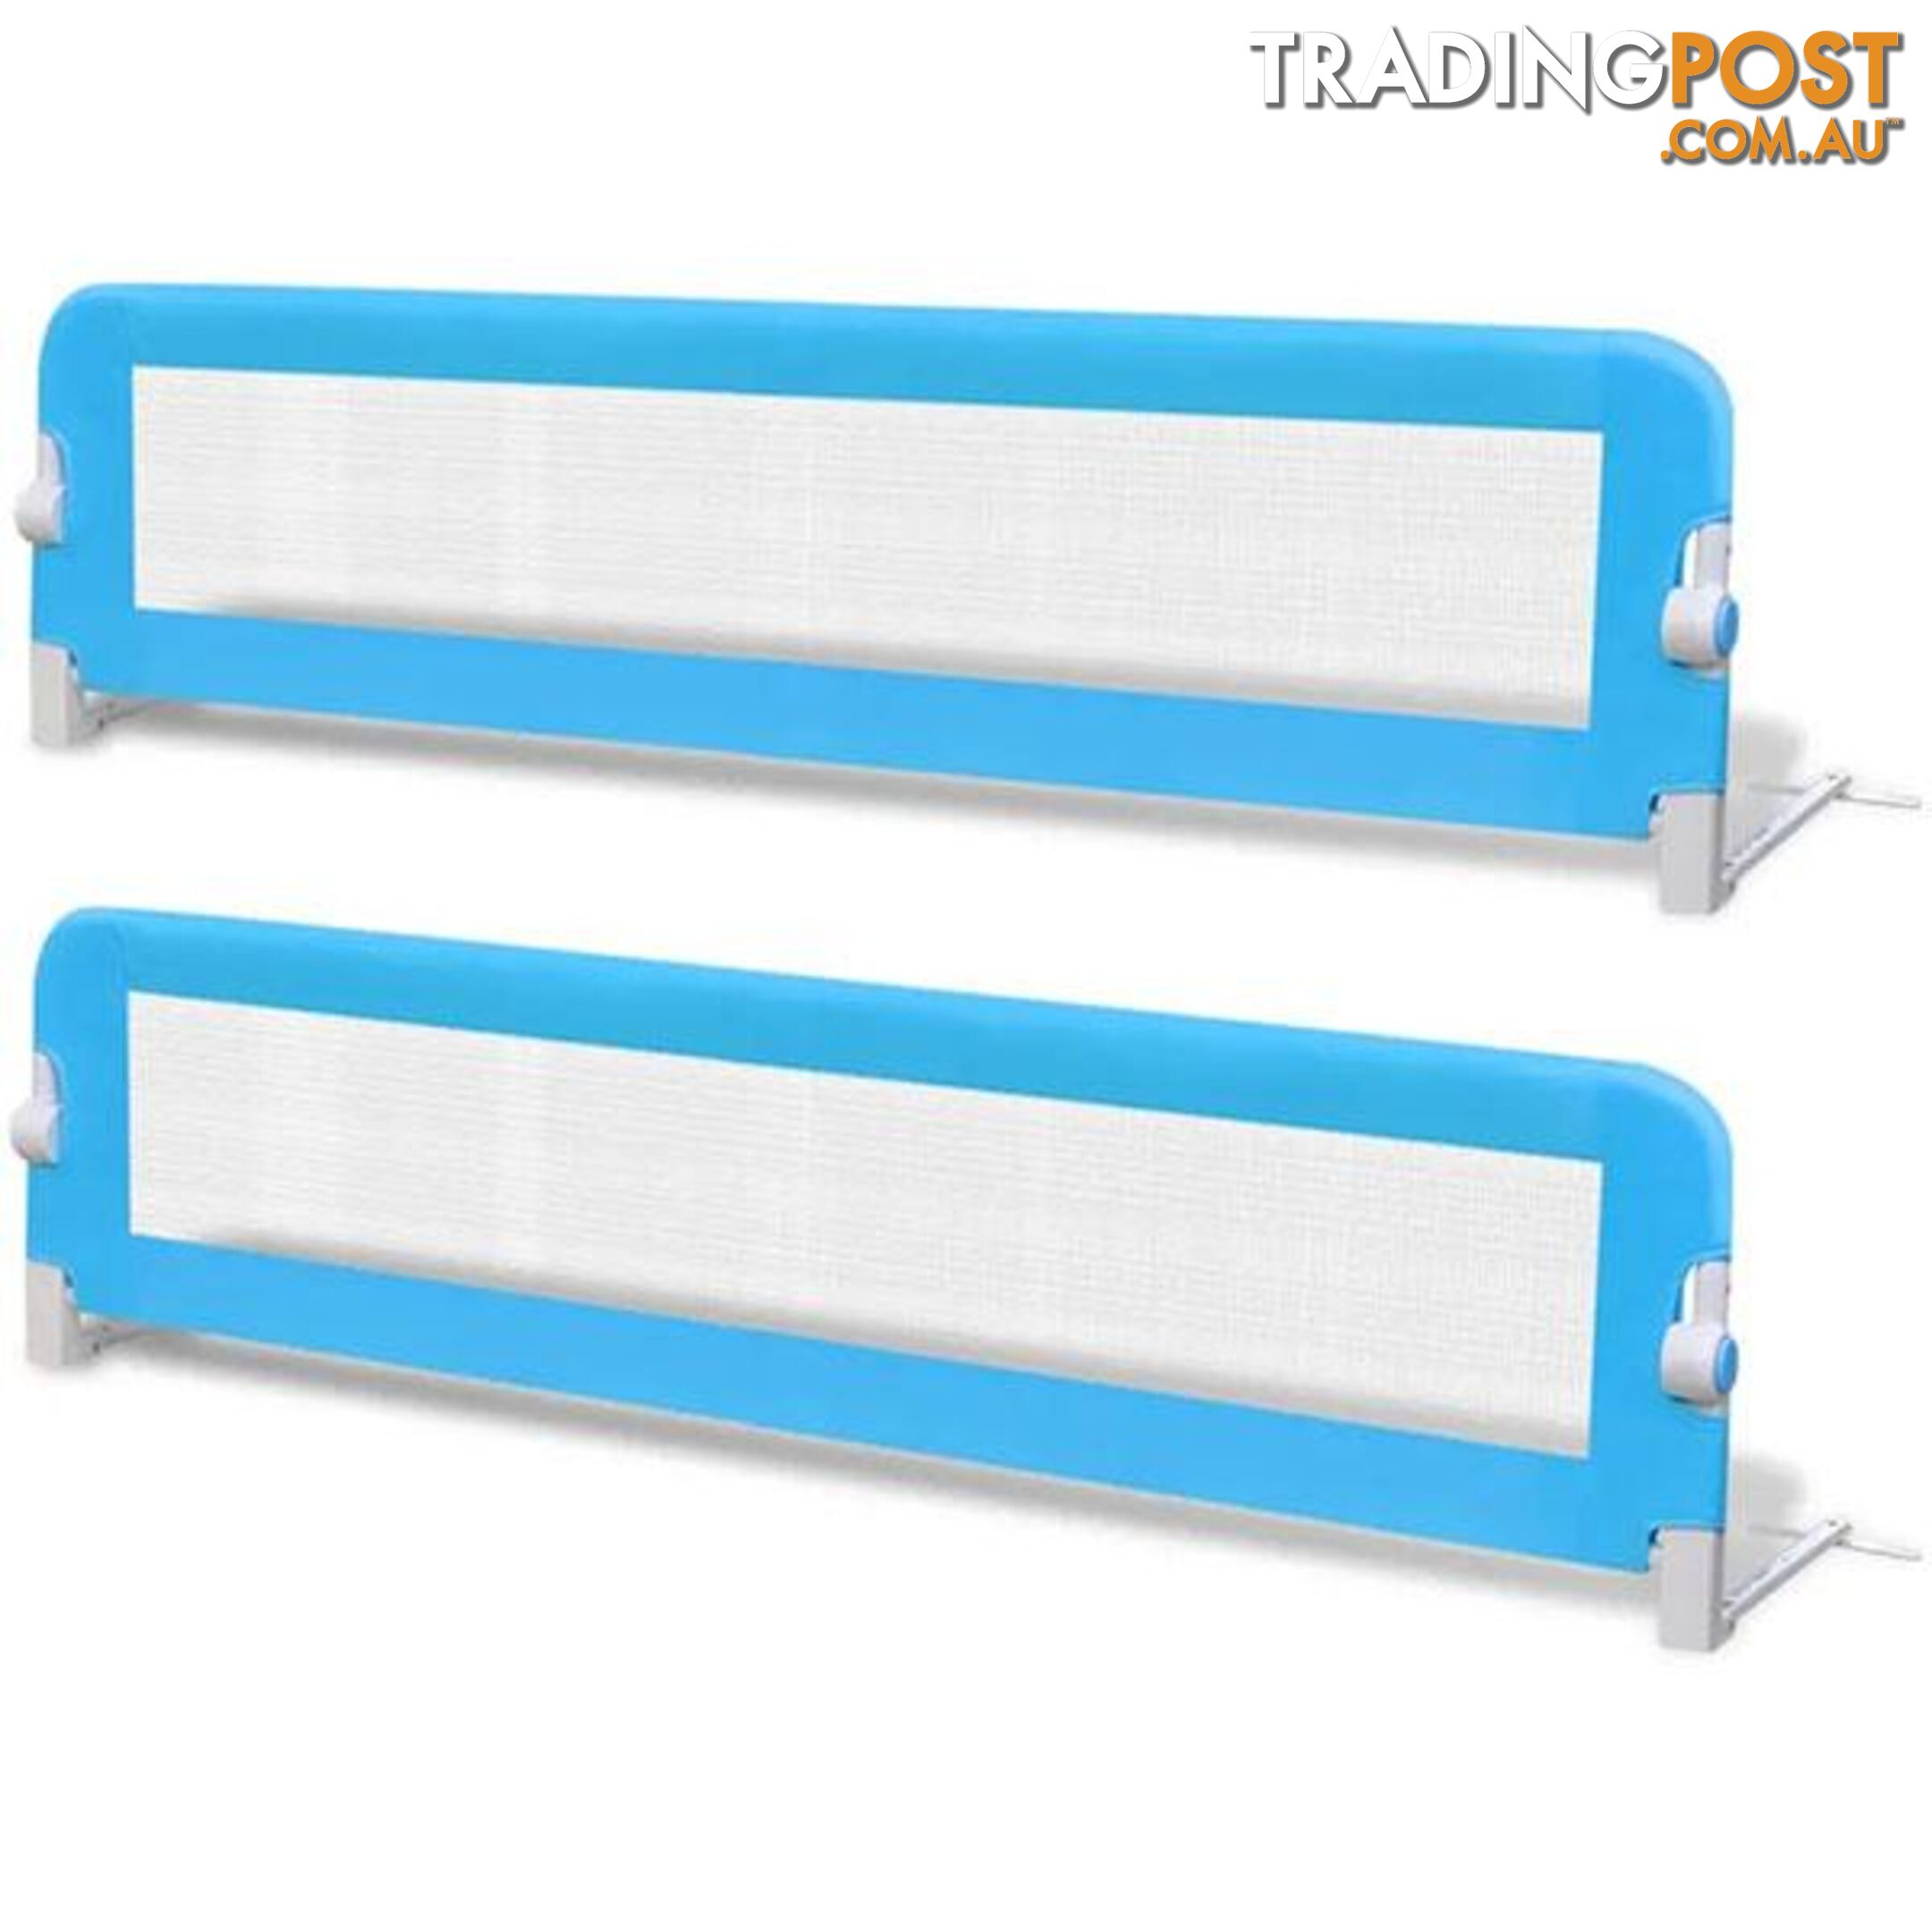 2 Pieces Blue Toddler Safety Bed Rail 150x42cm - Unbranded - 9476062107765